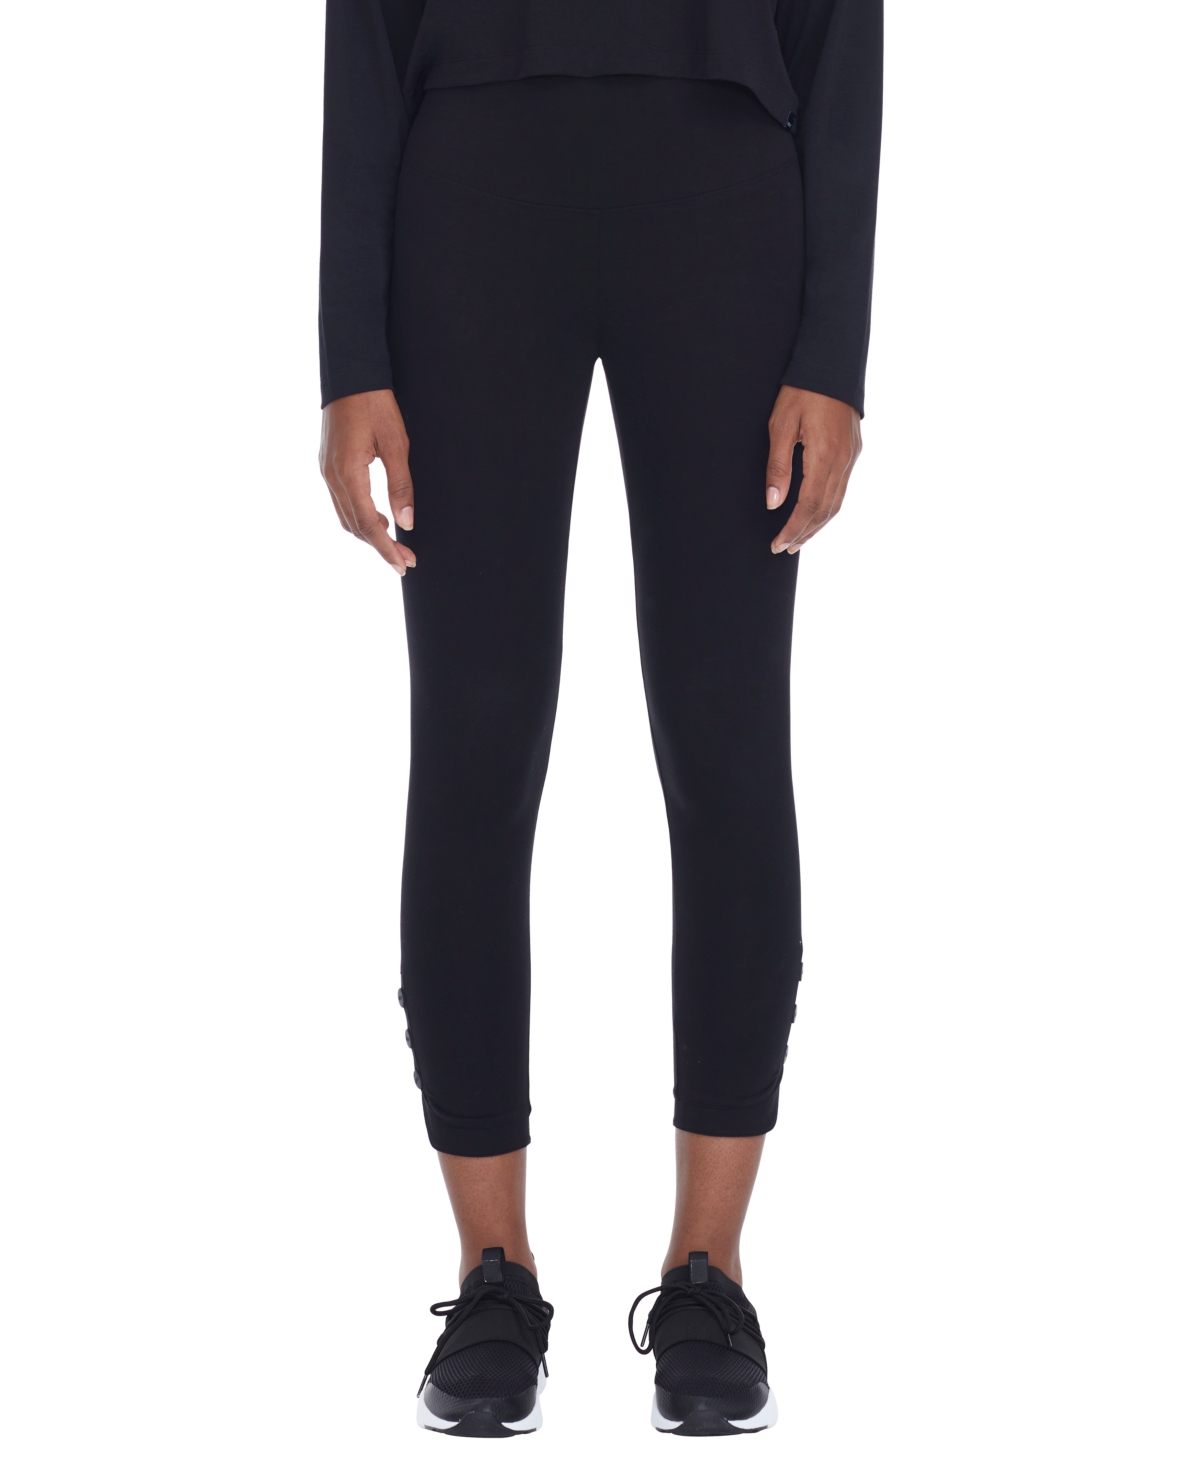 Marc New York Andrew Marc Sports 7/8 Legging Pants With Snaps In Black